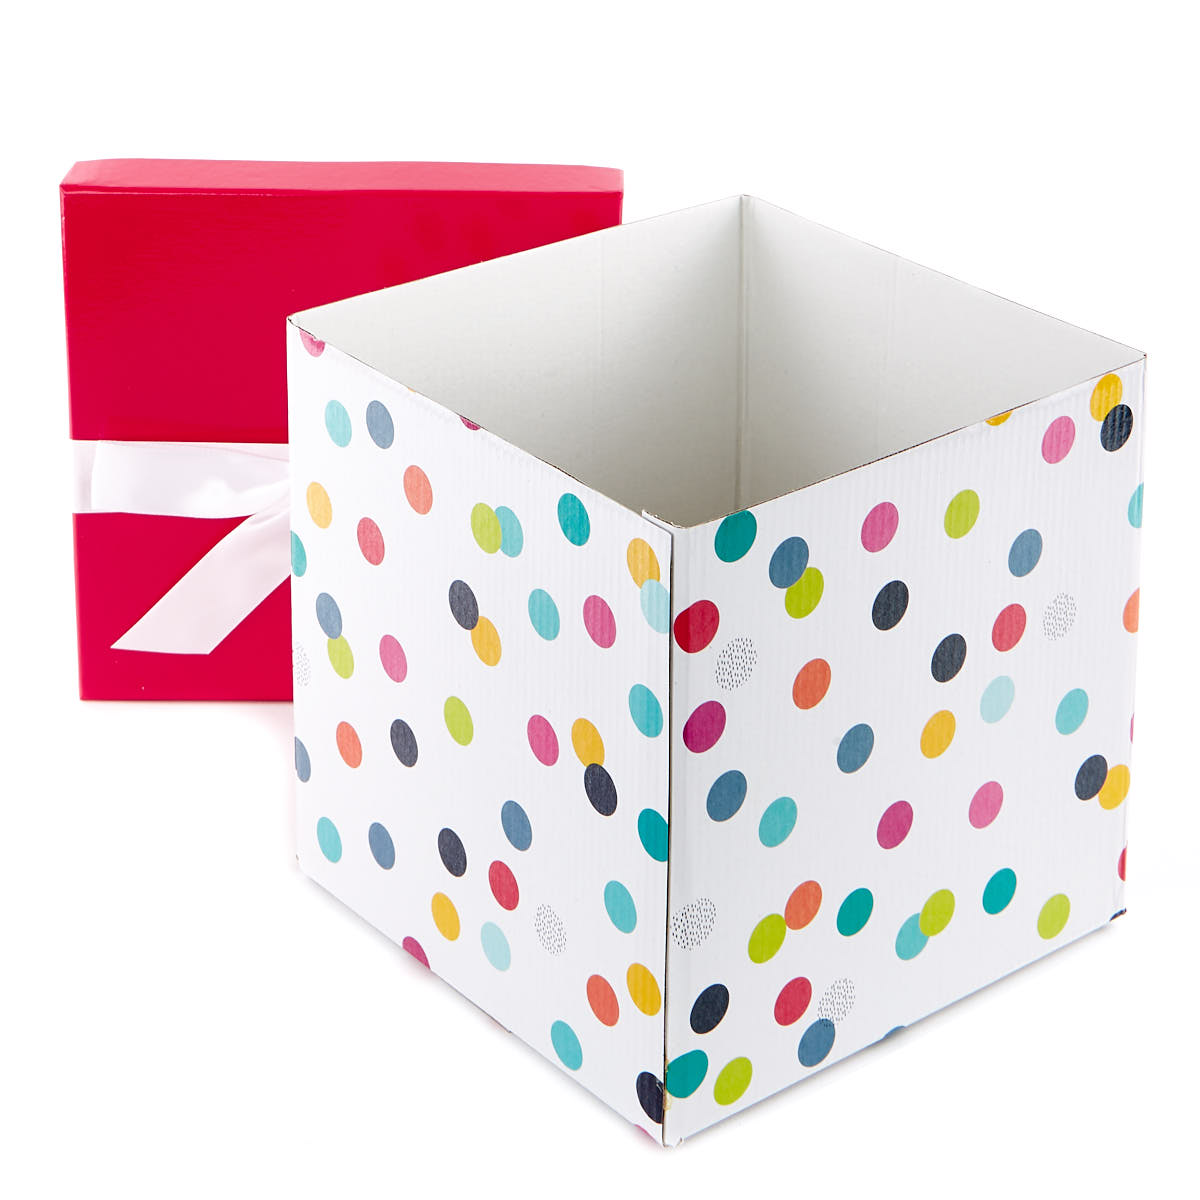 Buy Large FlatPack Gift Box Red & White With Spots for